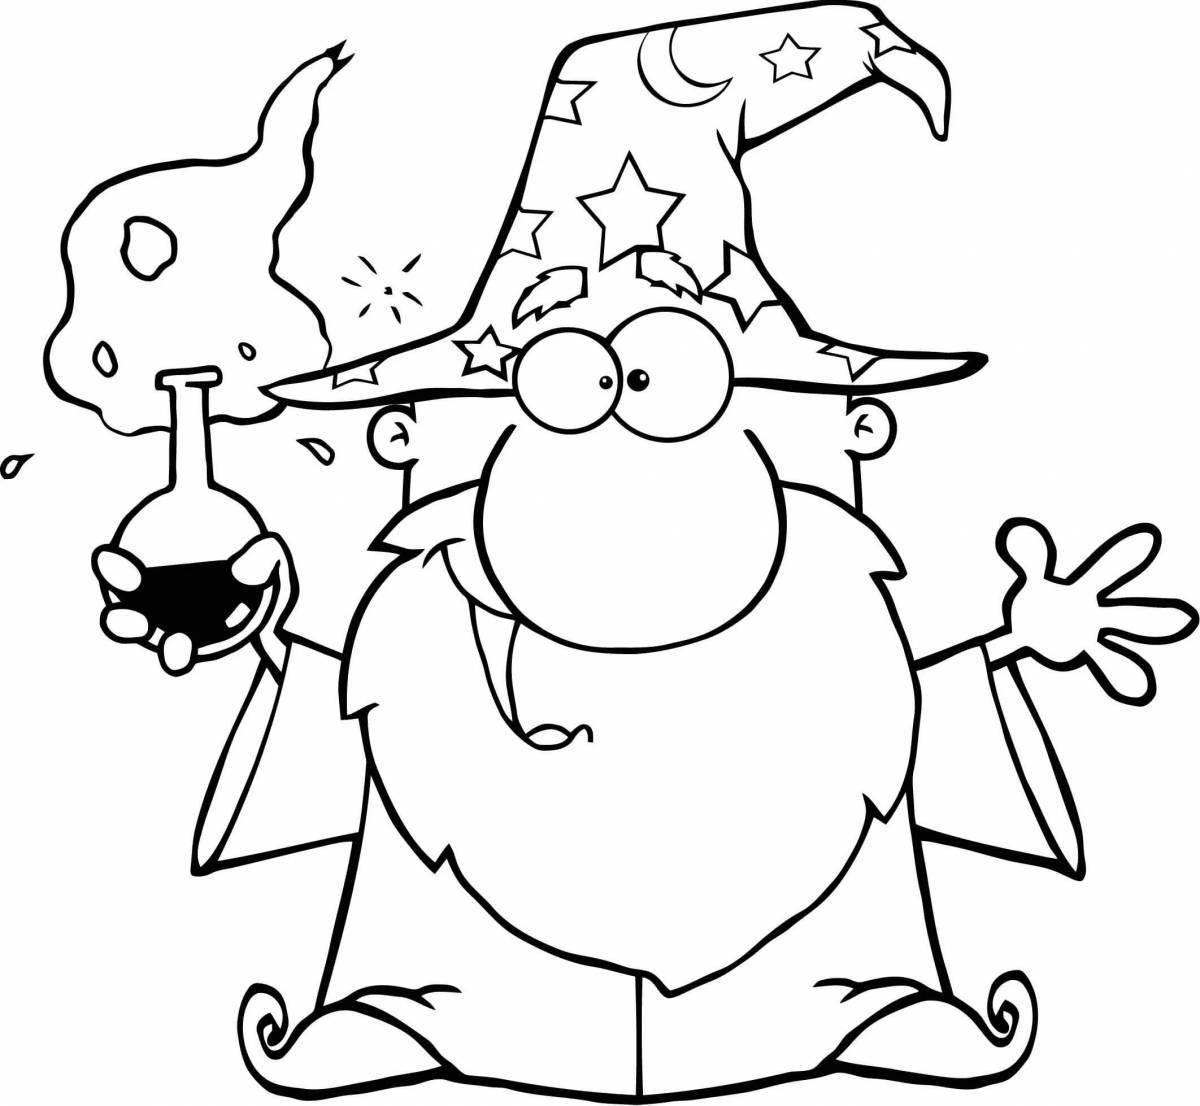 Coloring page hypnotic sorcerer